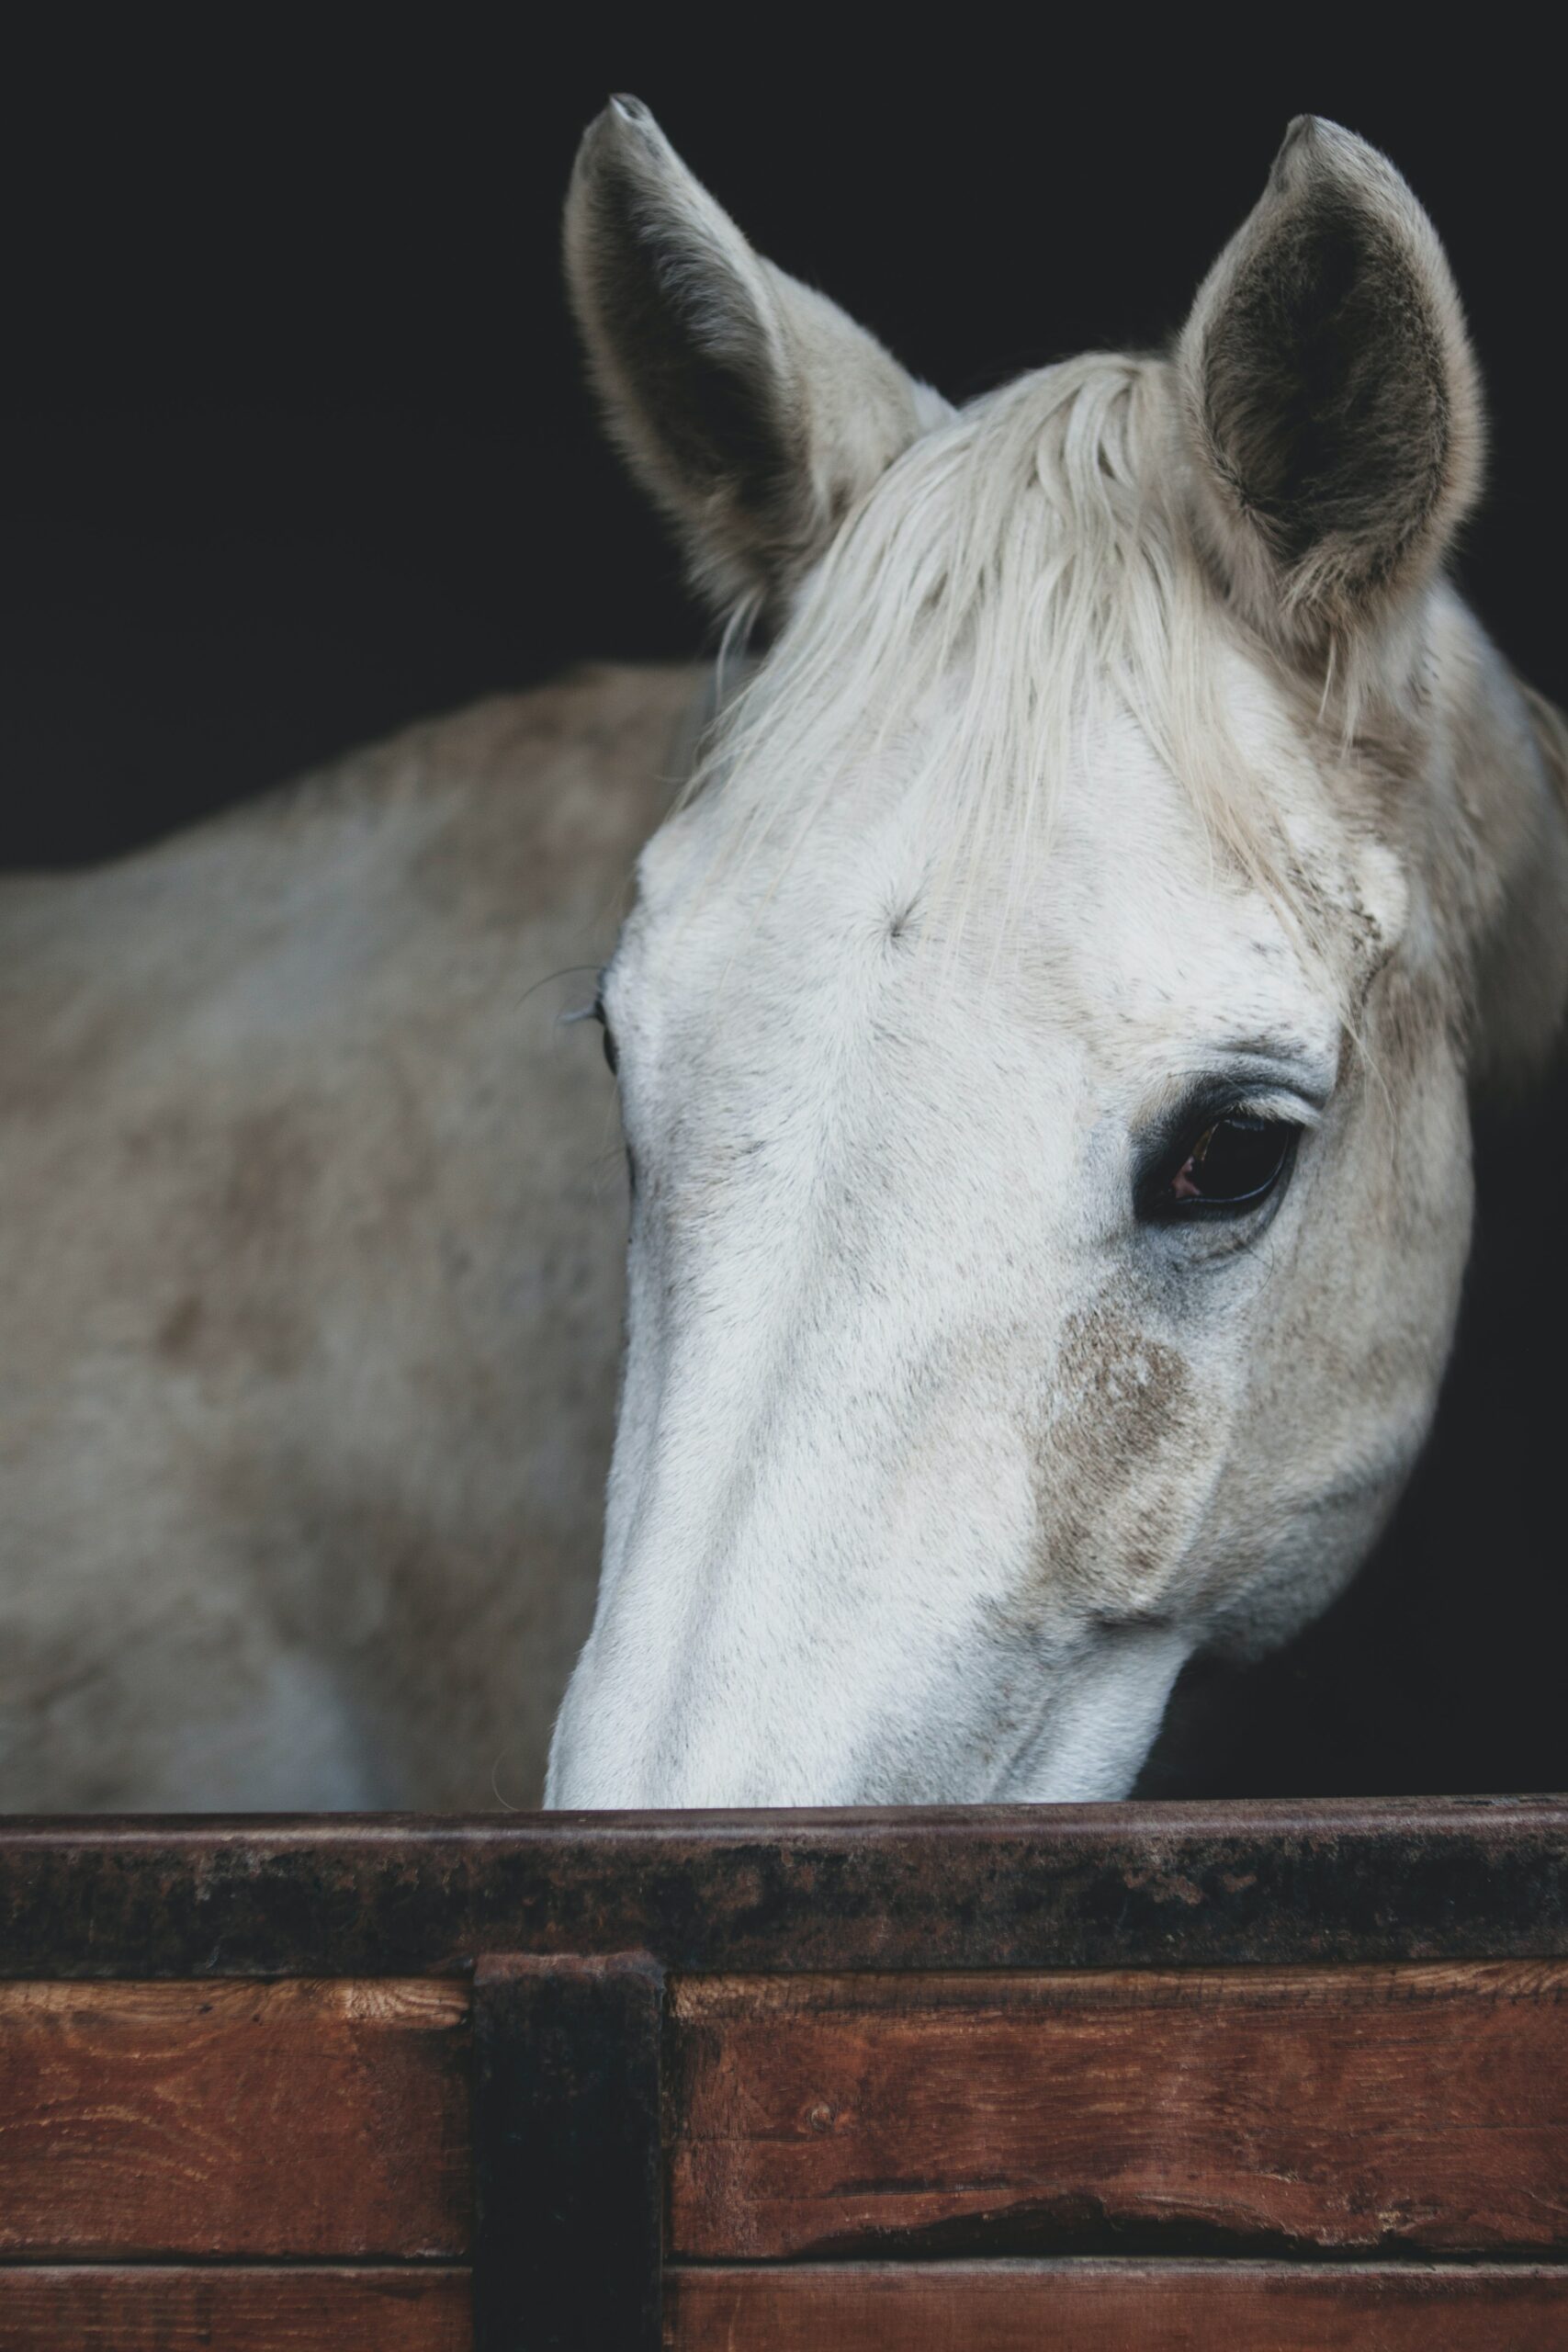 Do Horses Need Bedding in Their Stalls?